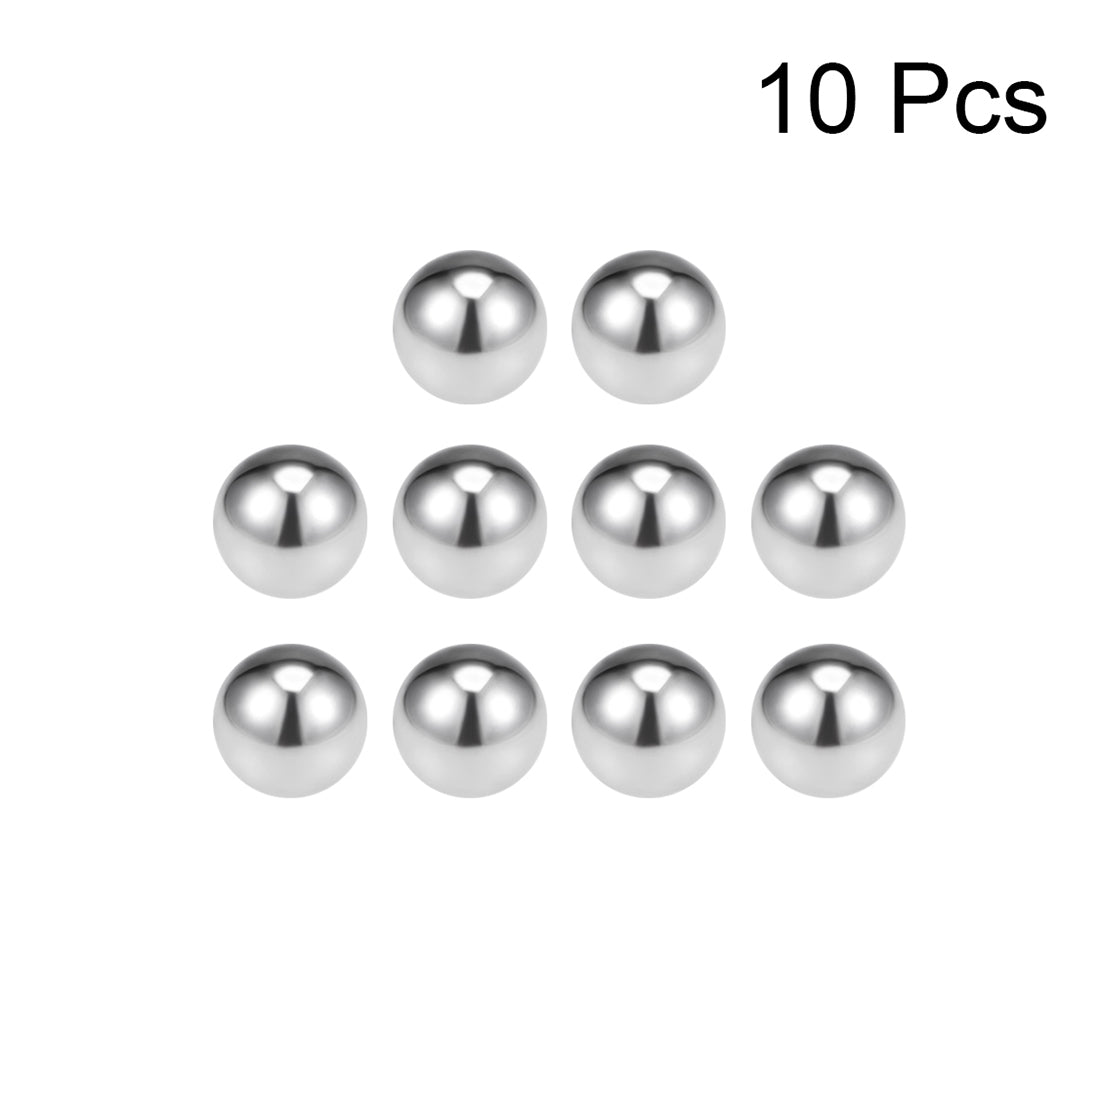 Uxcell Uxcell 25mm Bearing Balls 304 Stainless Steel G100 Precision Balls 10pcs